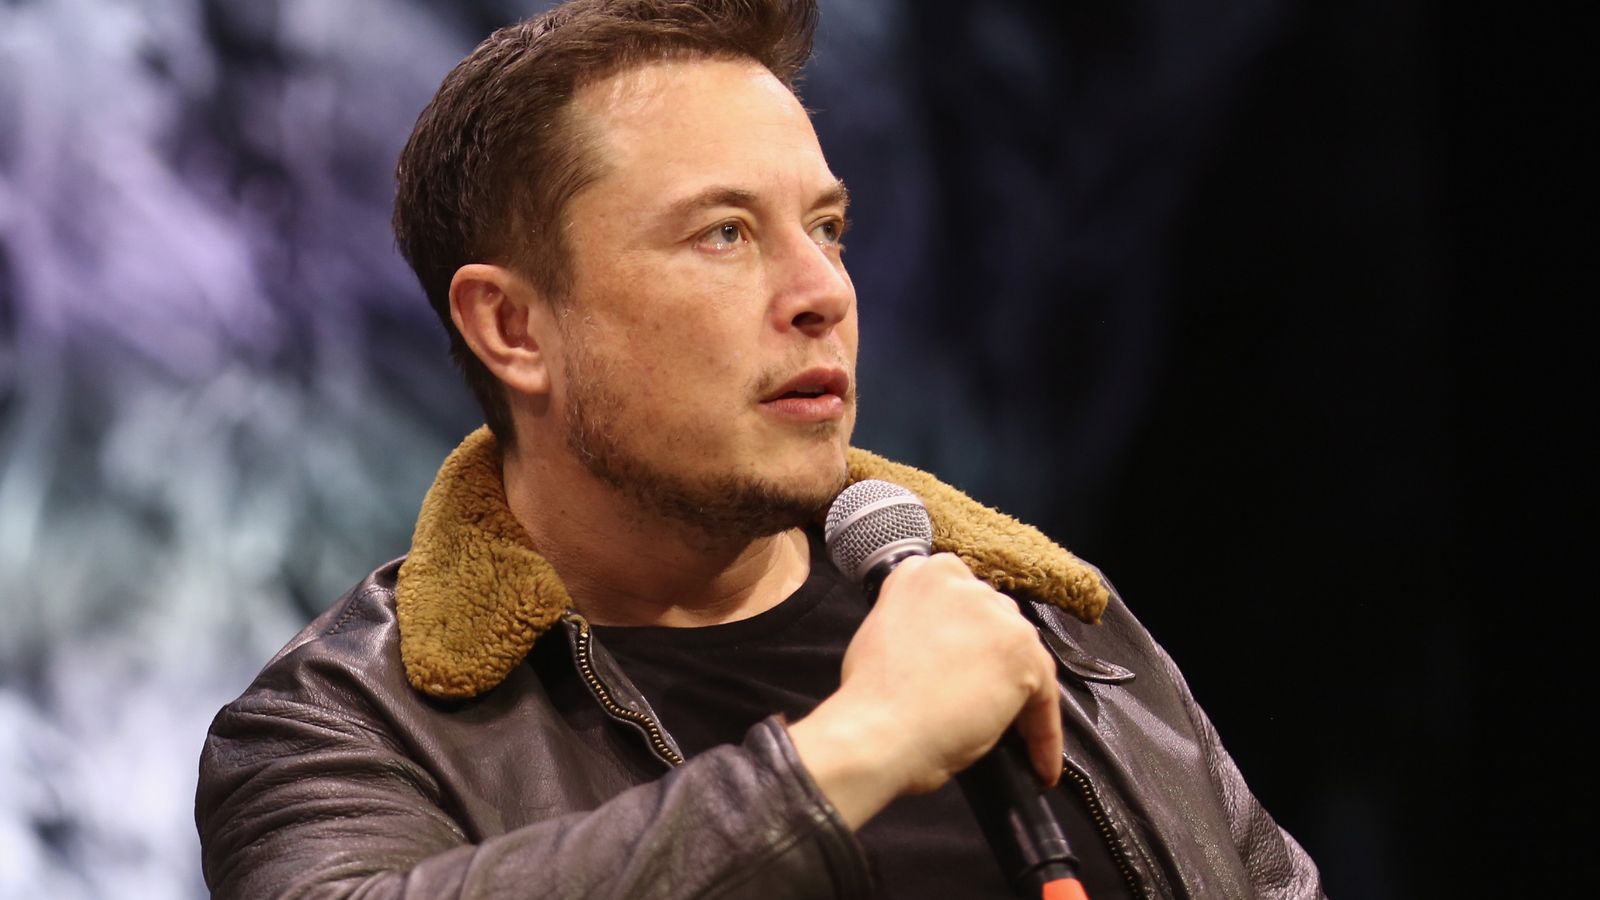 Elon Musk sells home for $29m after vowing to sell 'almost all physical possessions'